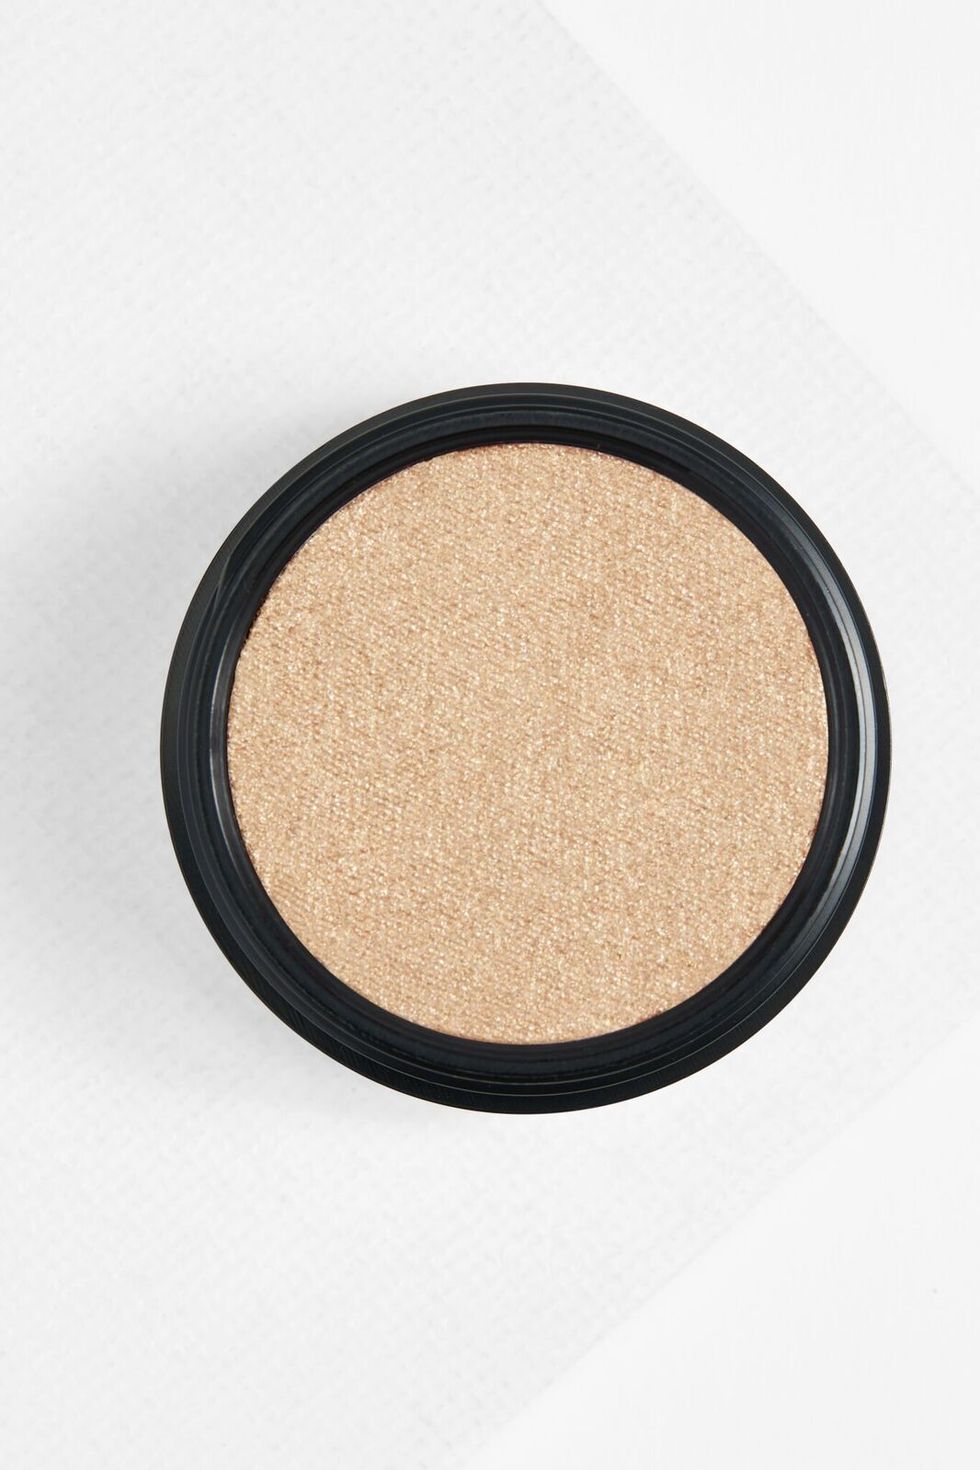 SUPER SHOCK HIGHLIGHTER IN "A SMILE AND A SONG"